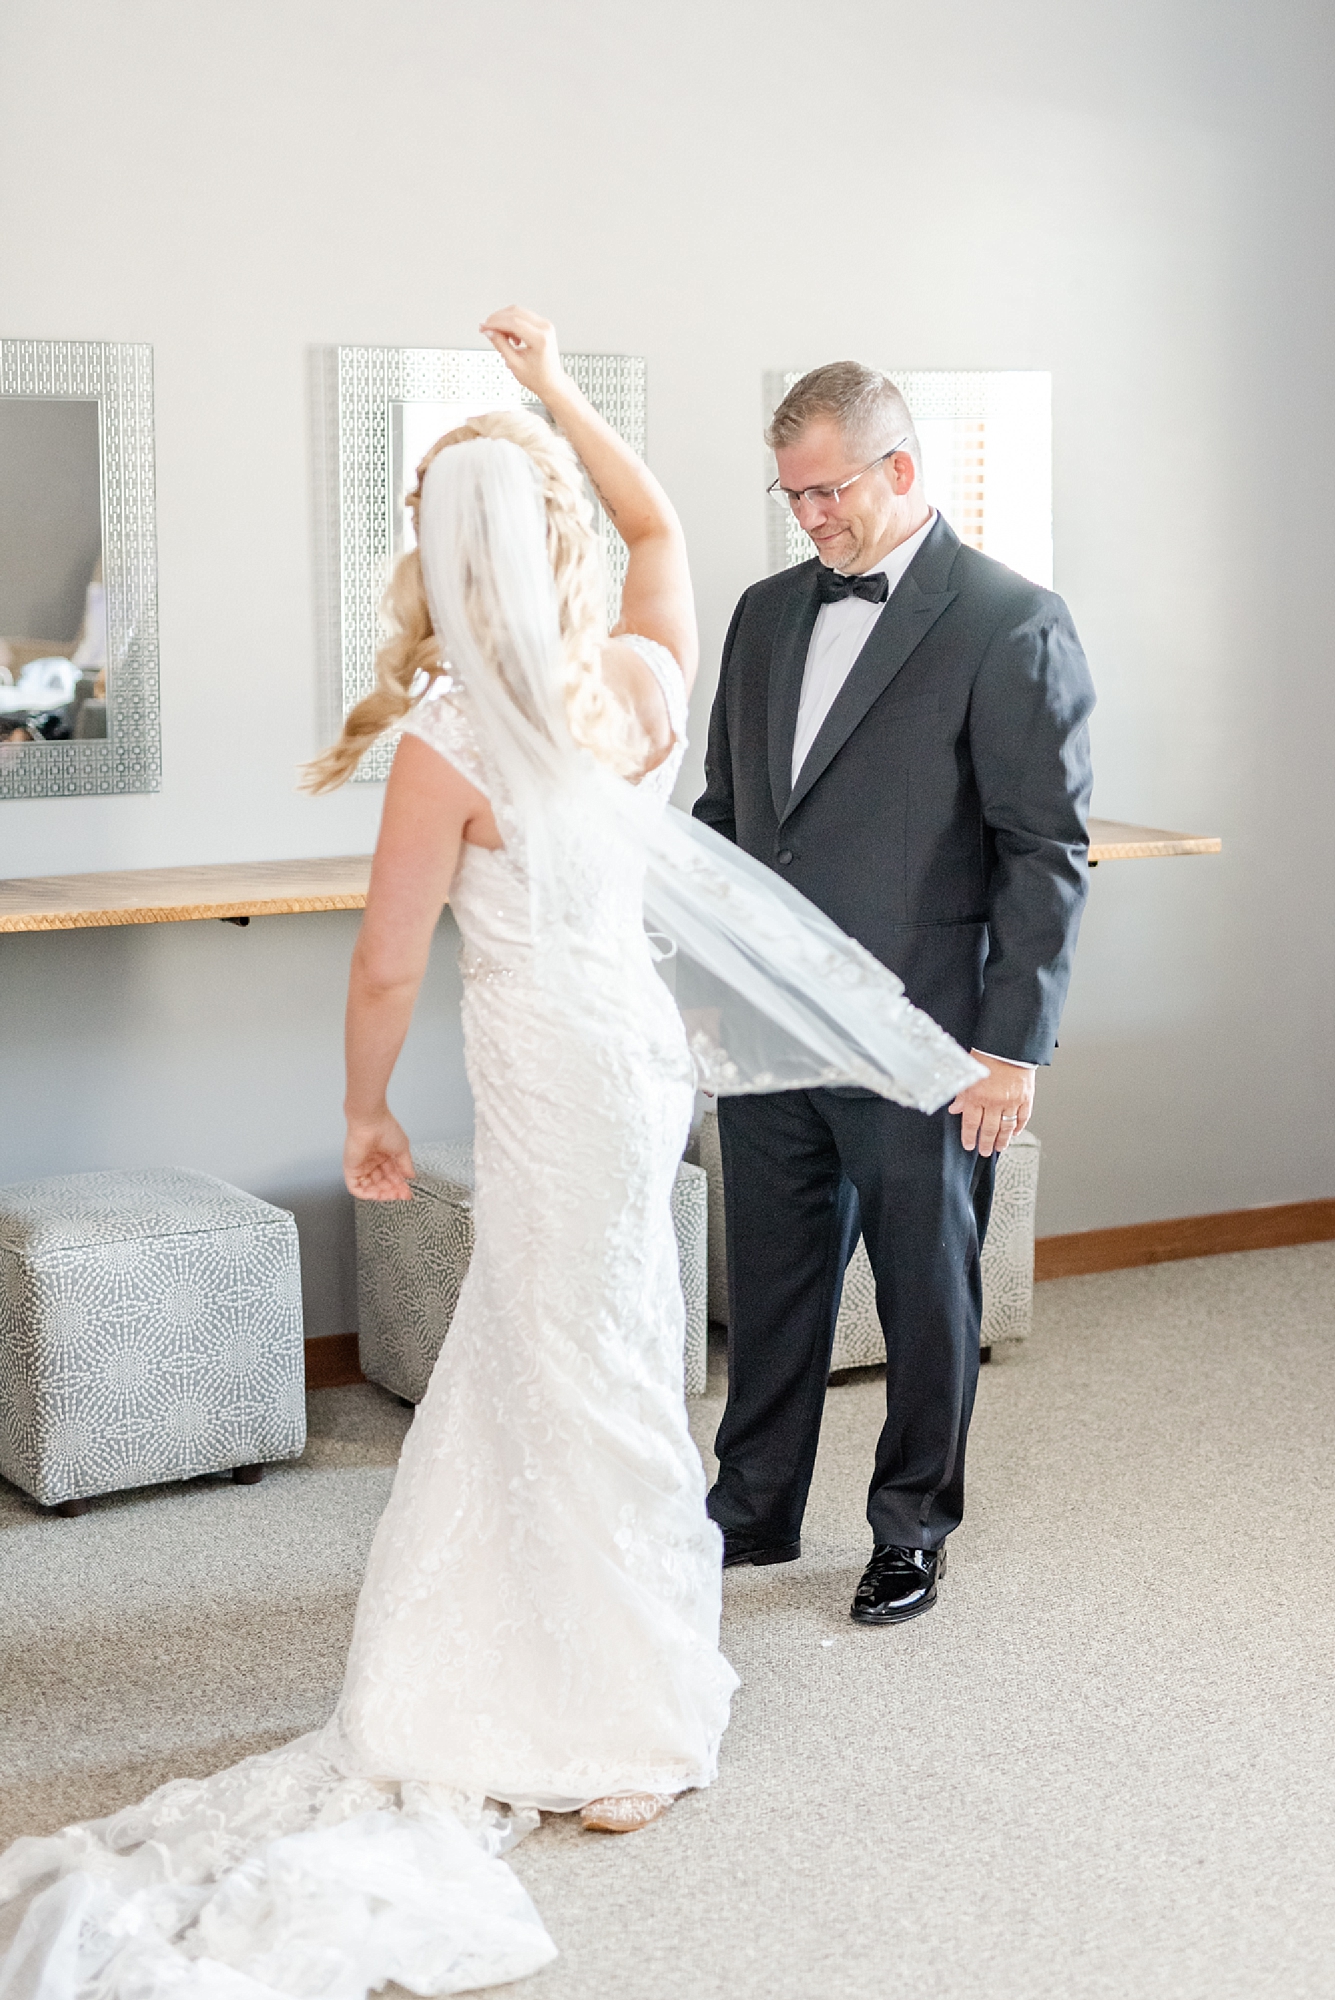 bride shows off veil to father during father-daughter first look